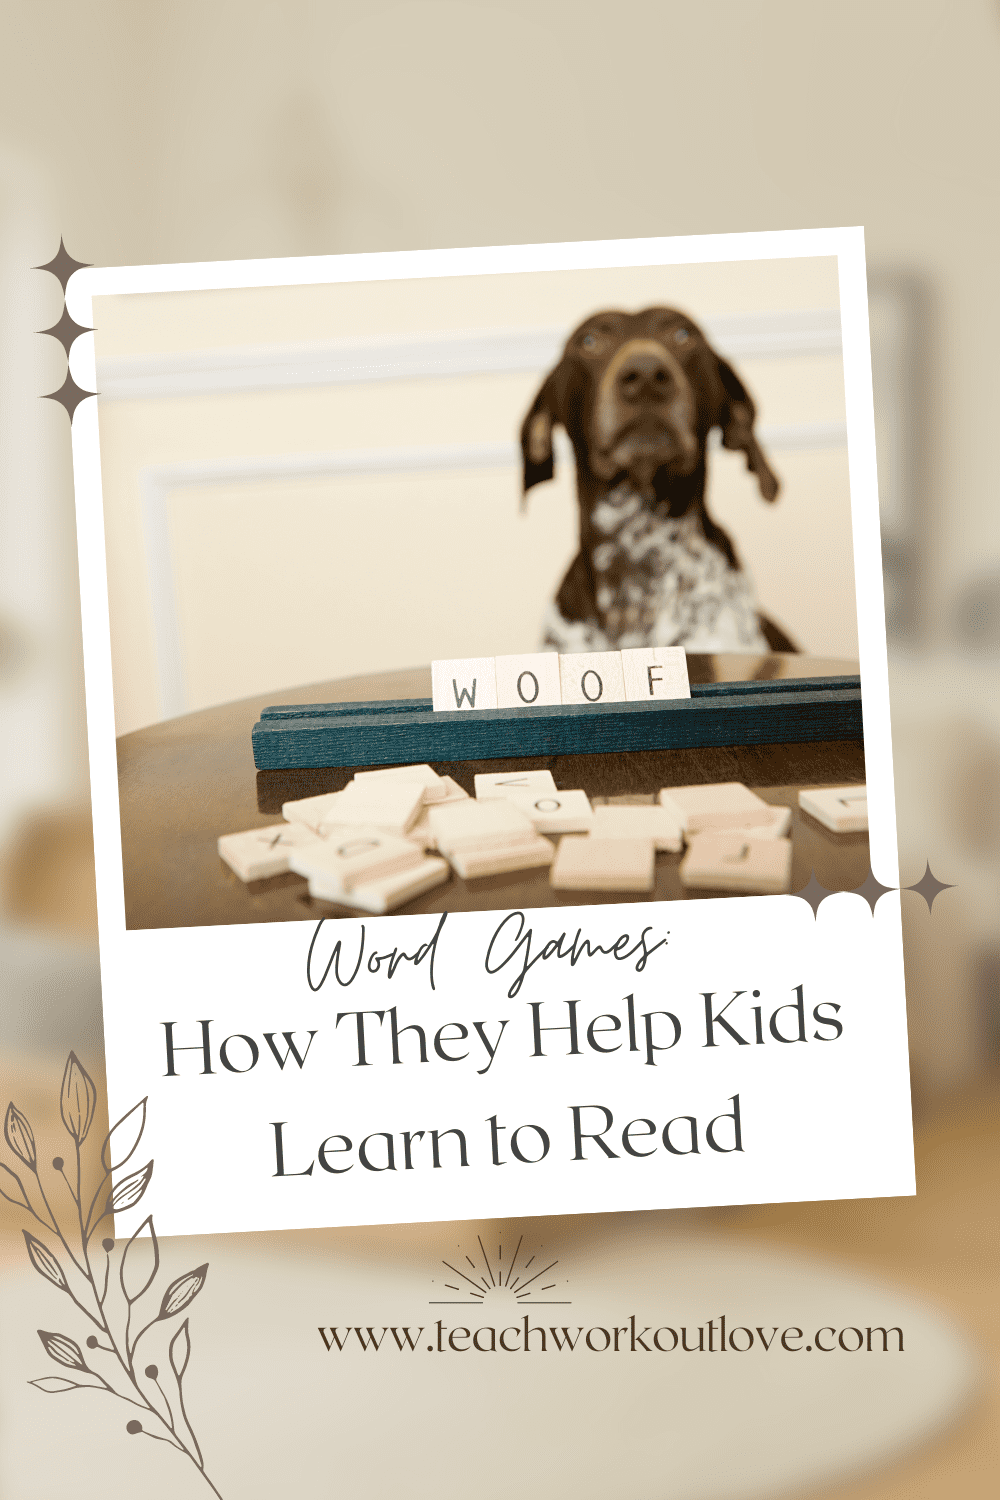 Let's explore some of the benefits of using word games in children's literacy education and observe examples of popular word games that can be used at home or in the classroom.